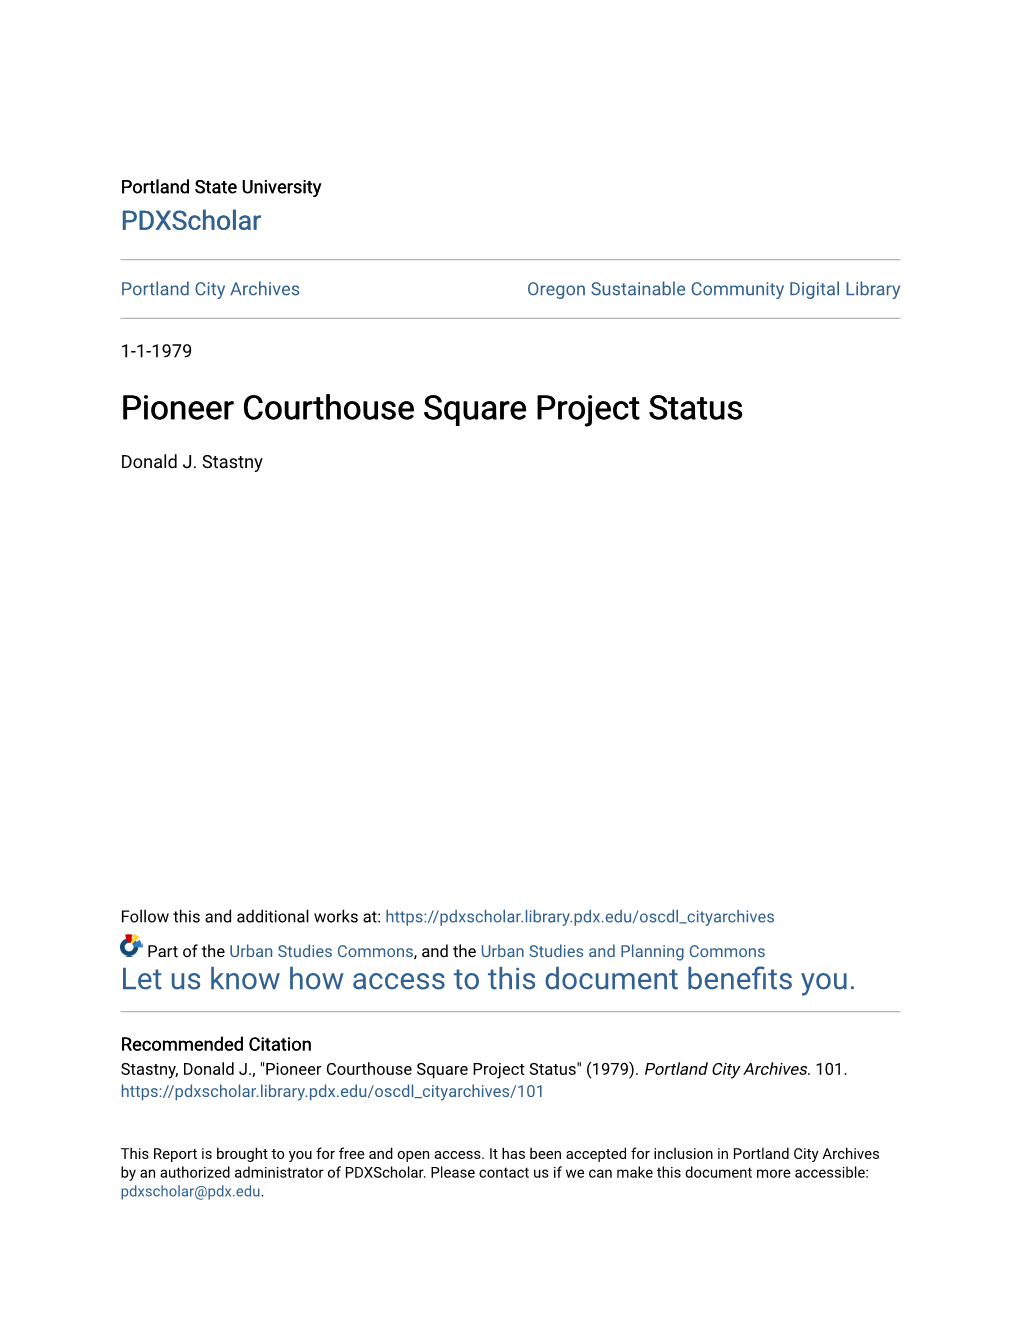 Pioneer Courthouse Square Project Status